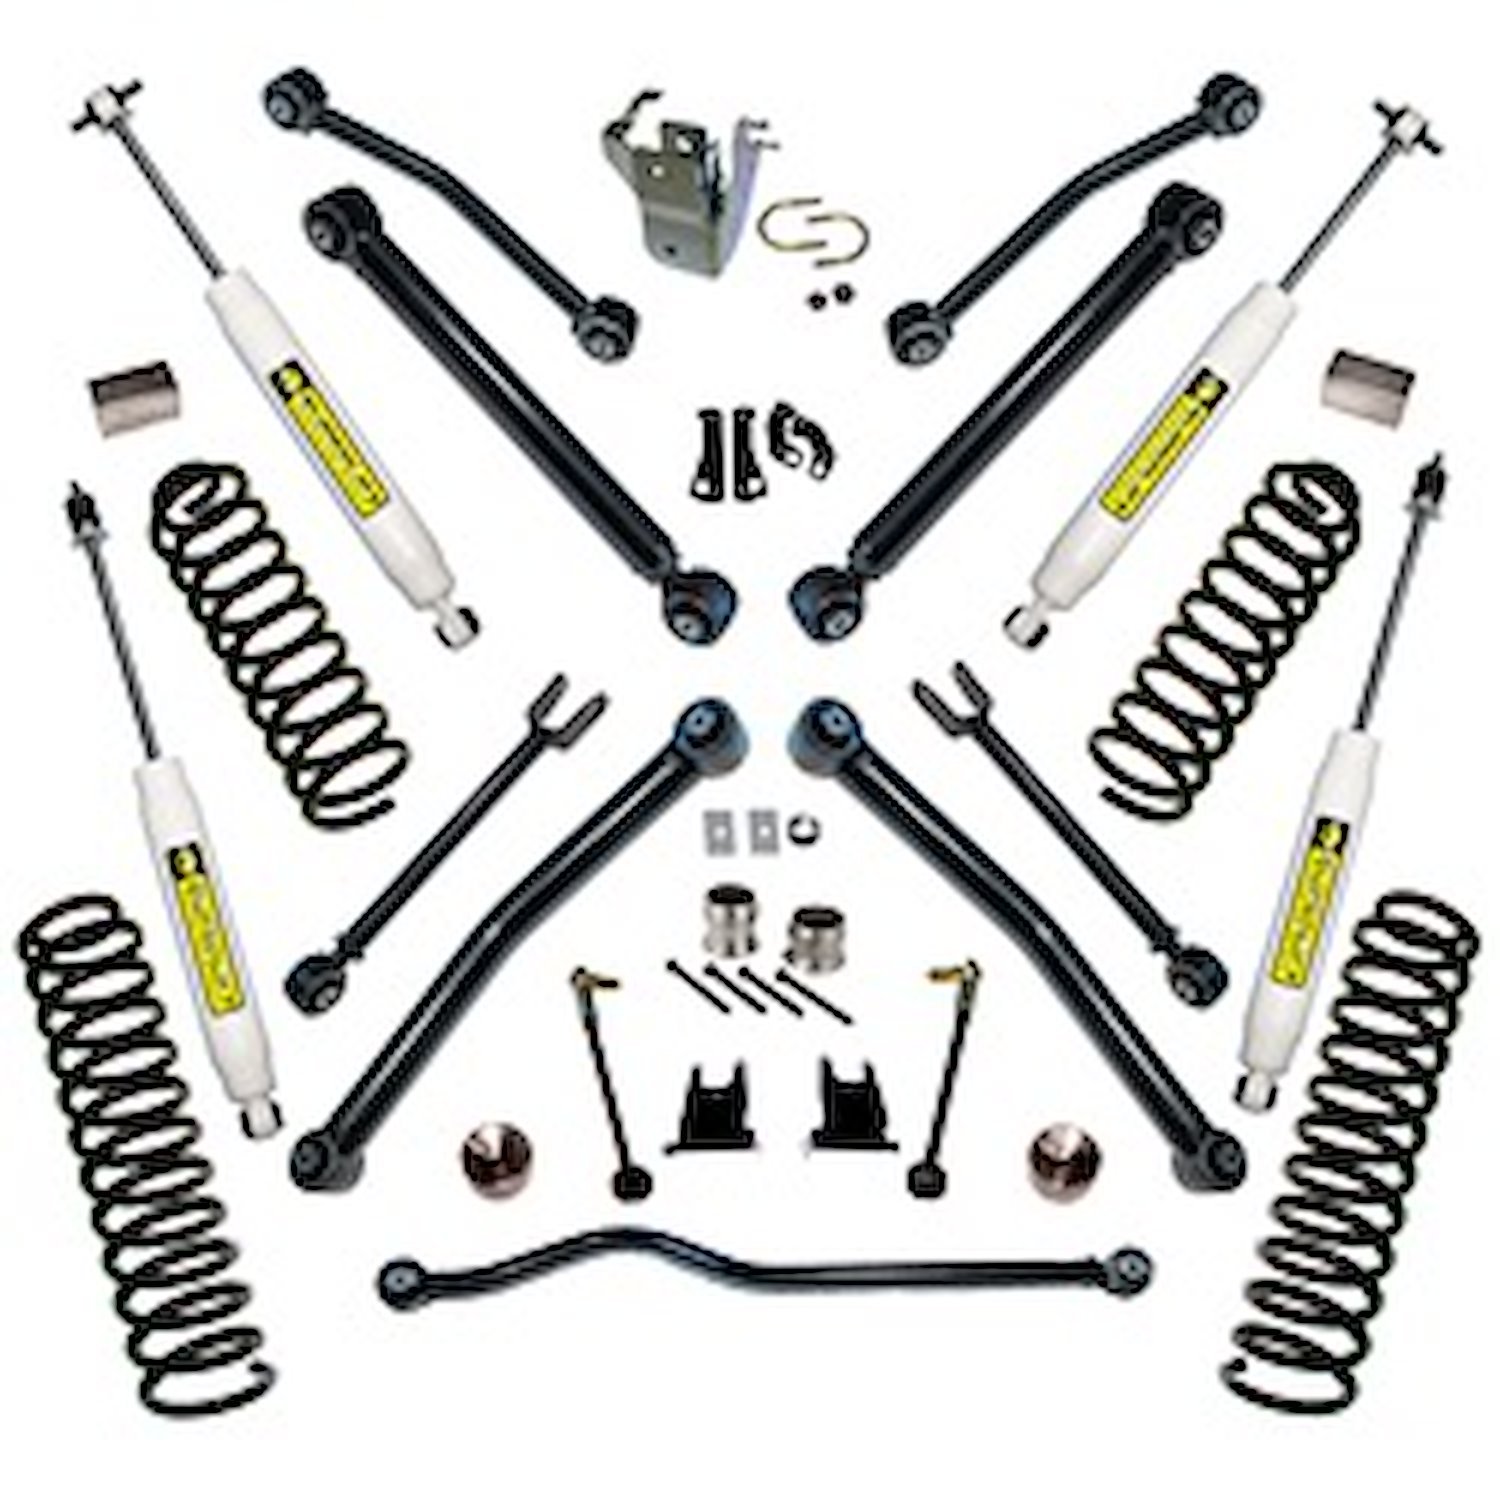 K997 Front and Rear Suspension Lift Kit, Lift Amount: 4 in. Front/4 in. Rear